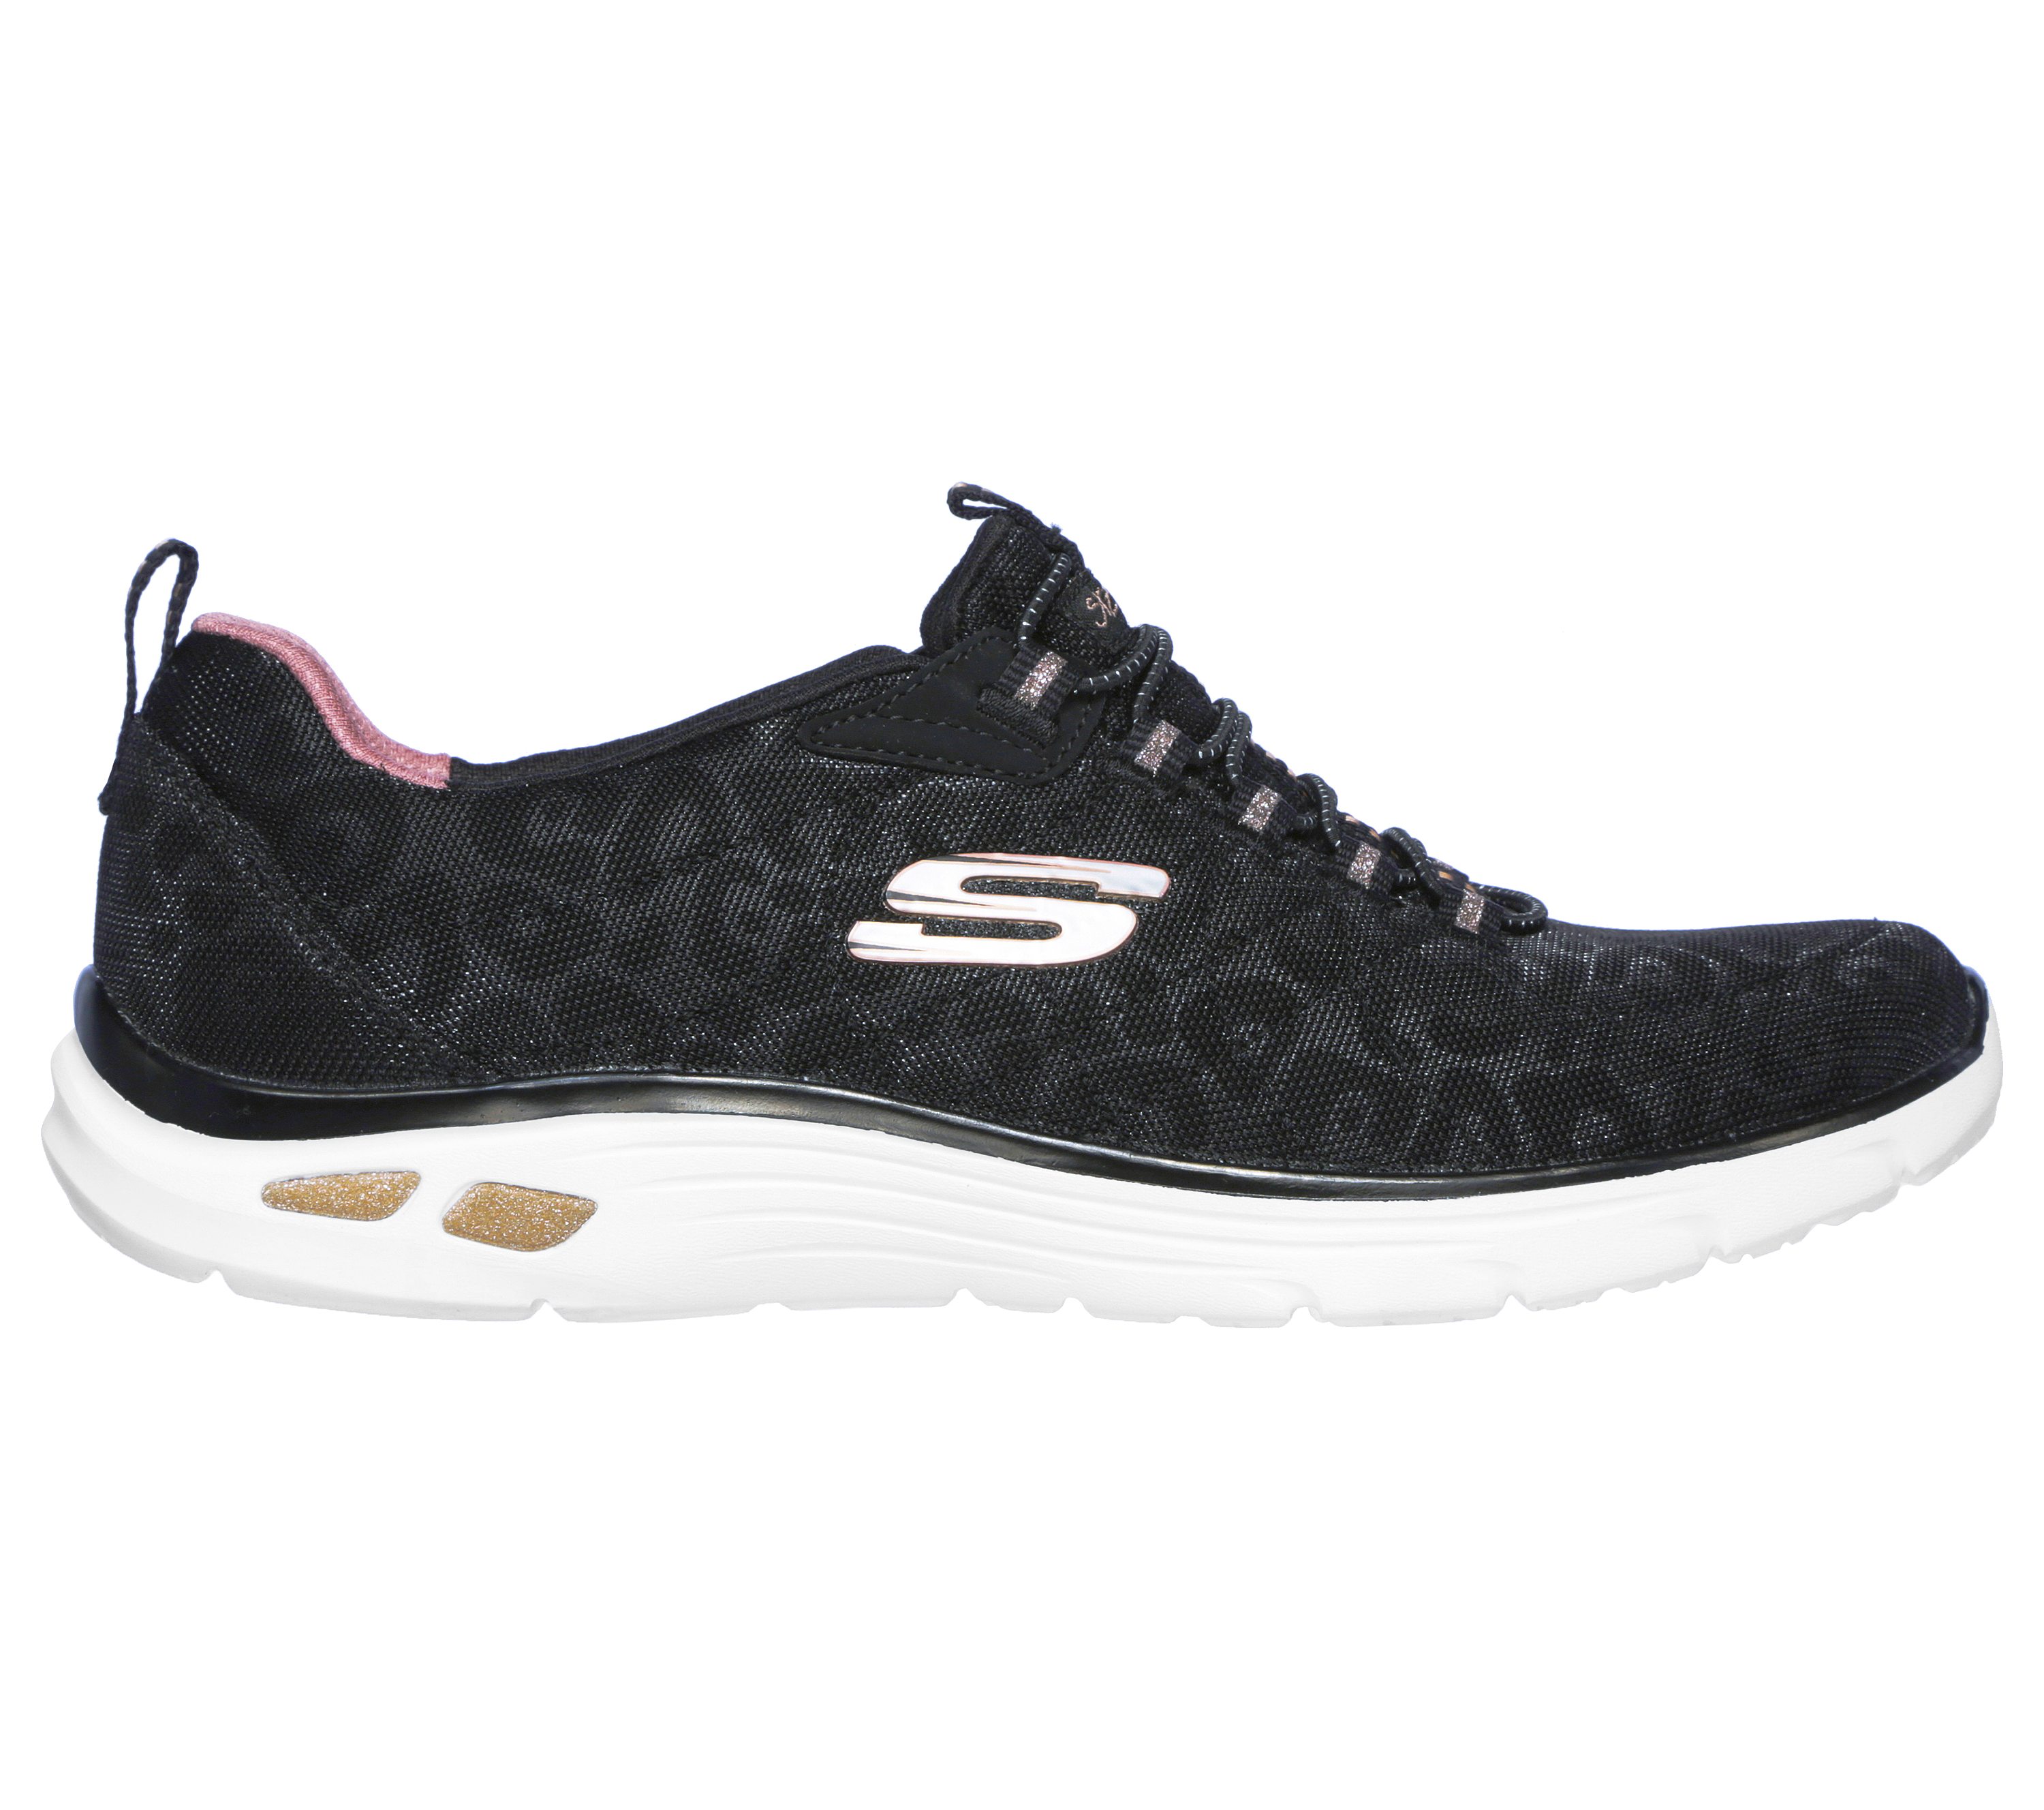 ære Monarch Kridt Relaxed Fit: Empire D'Lux - Spotted | SKECHERS UK